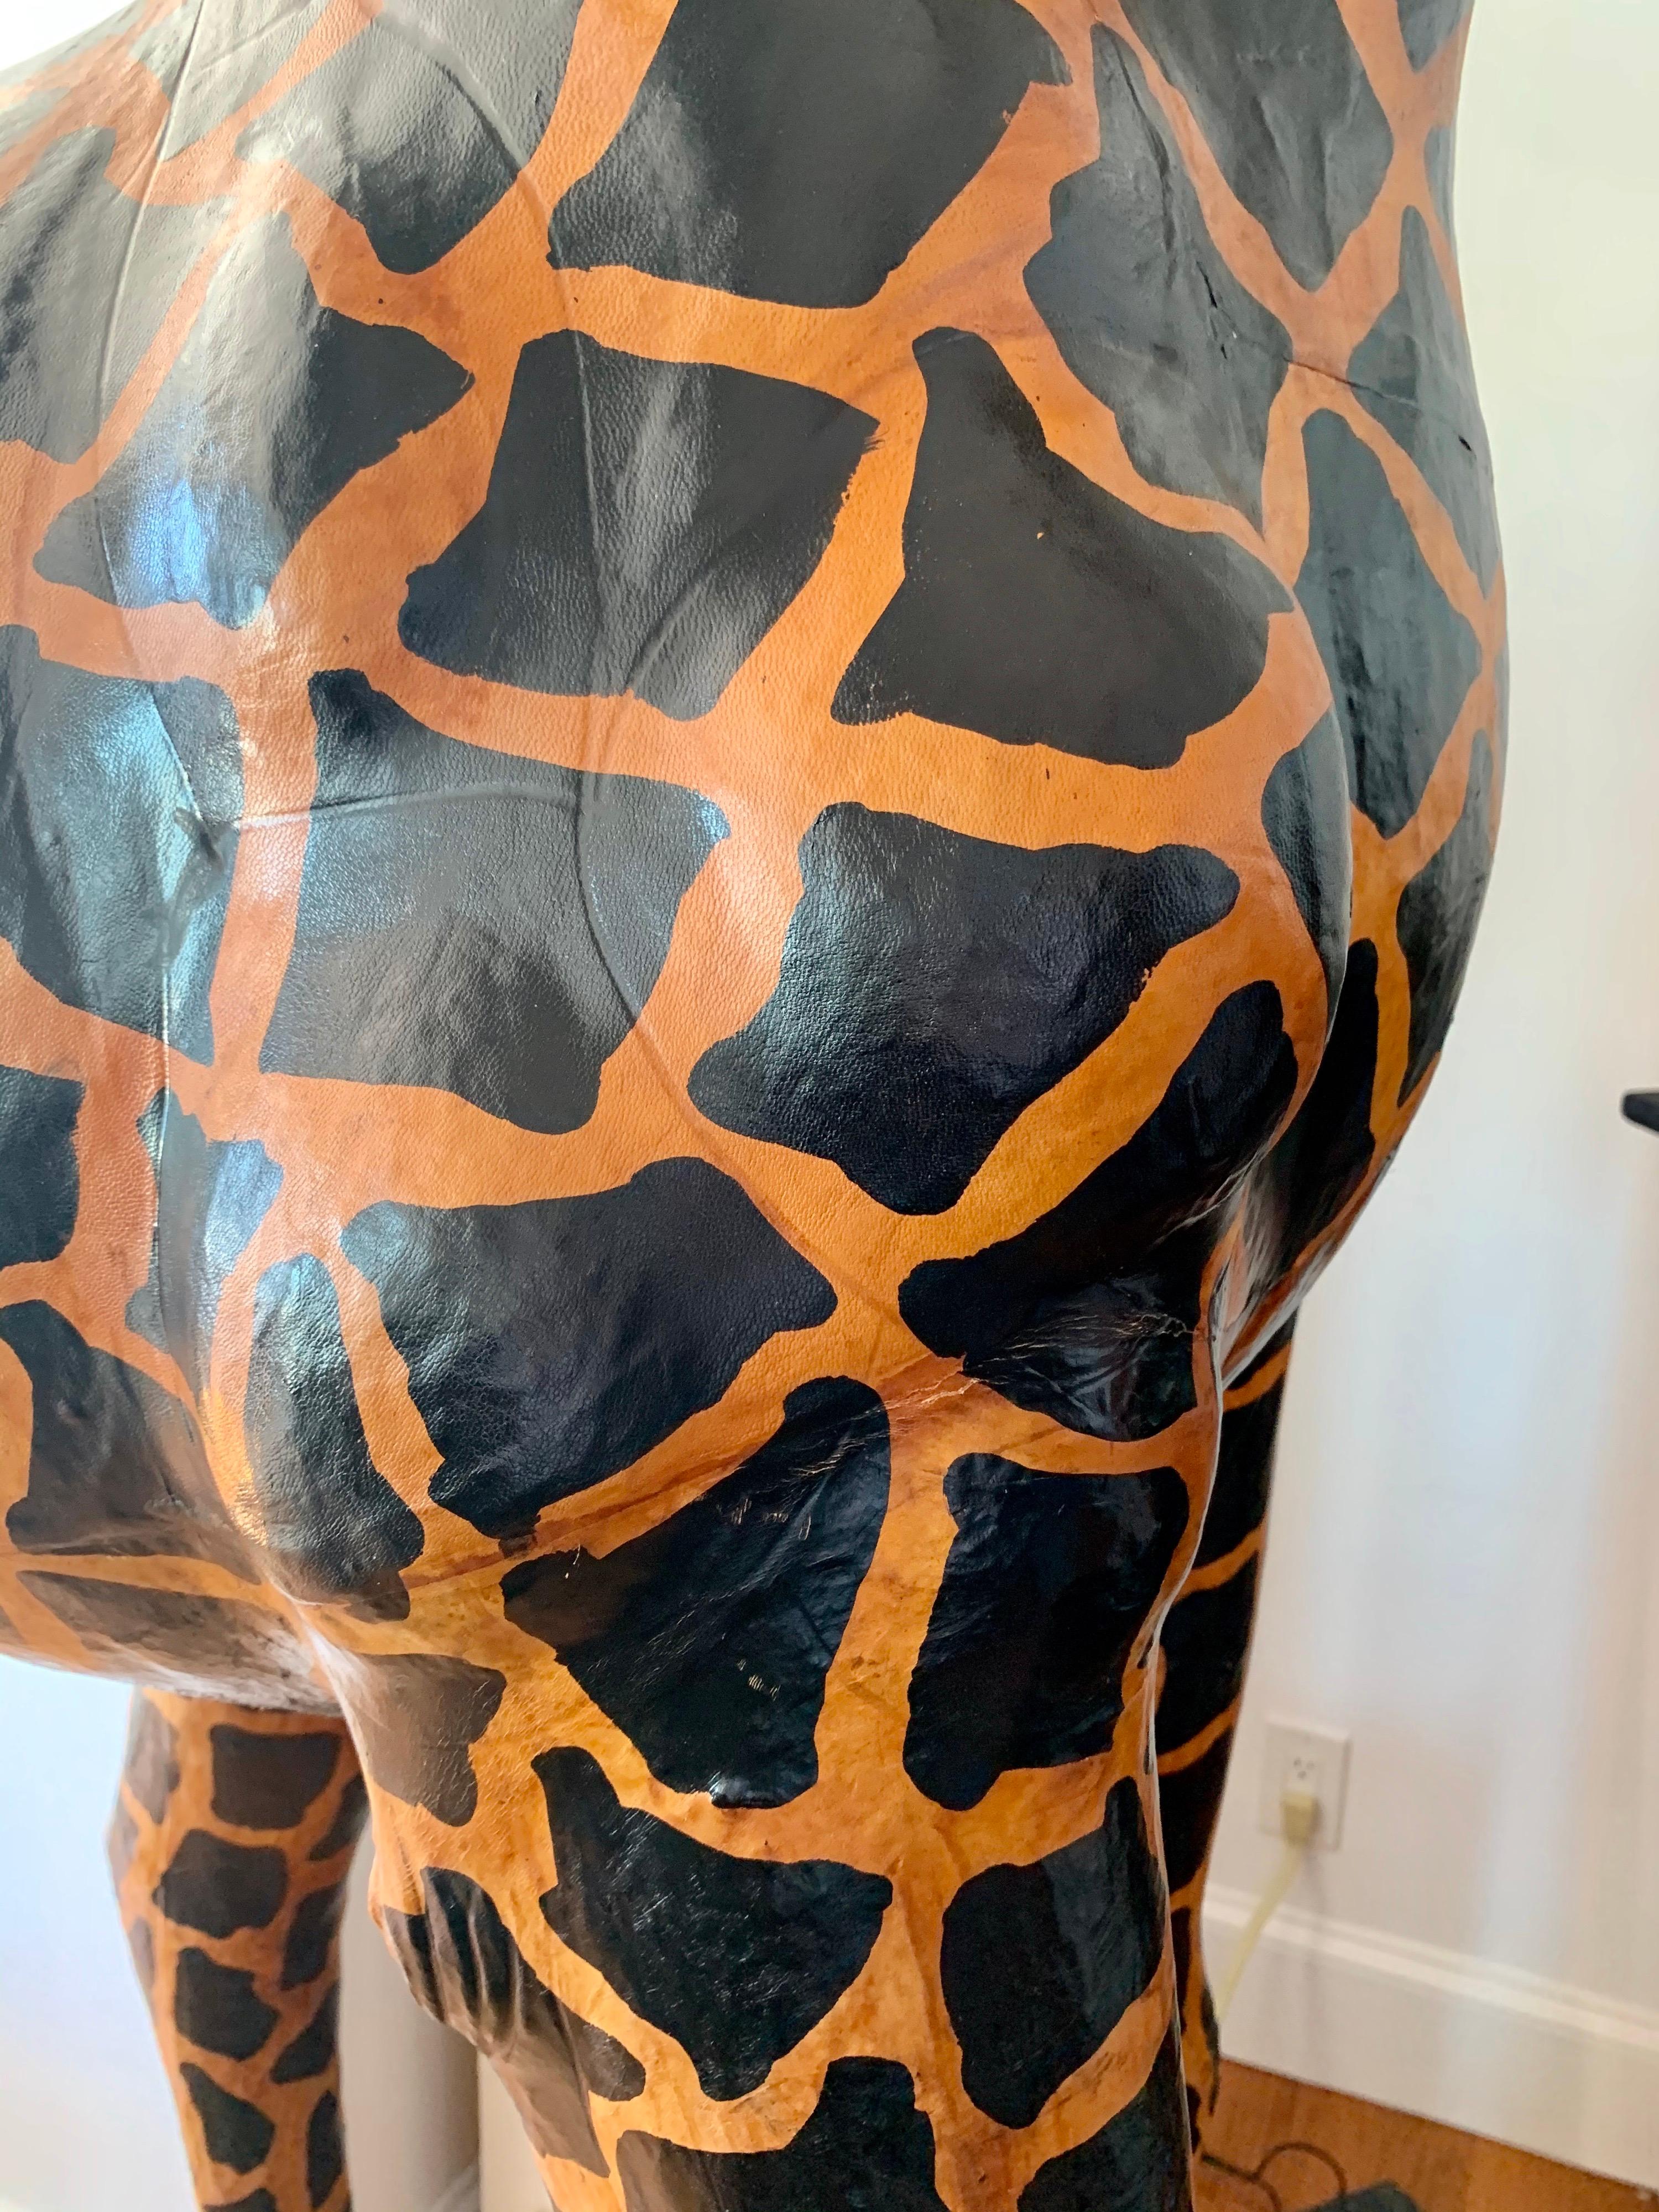 Large Life-Size Leather Giraffe Sculpture Almost Nine Feet Tall 8